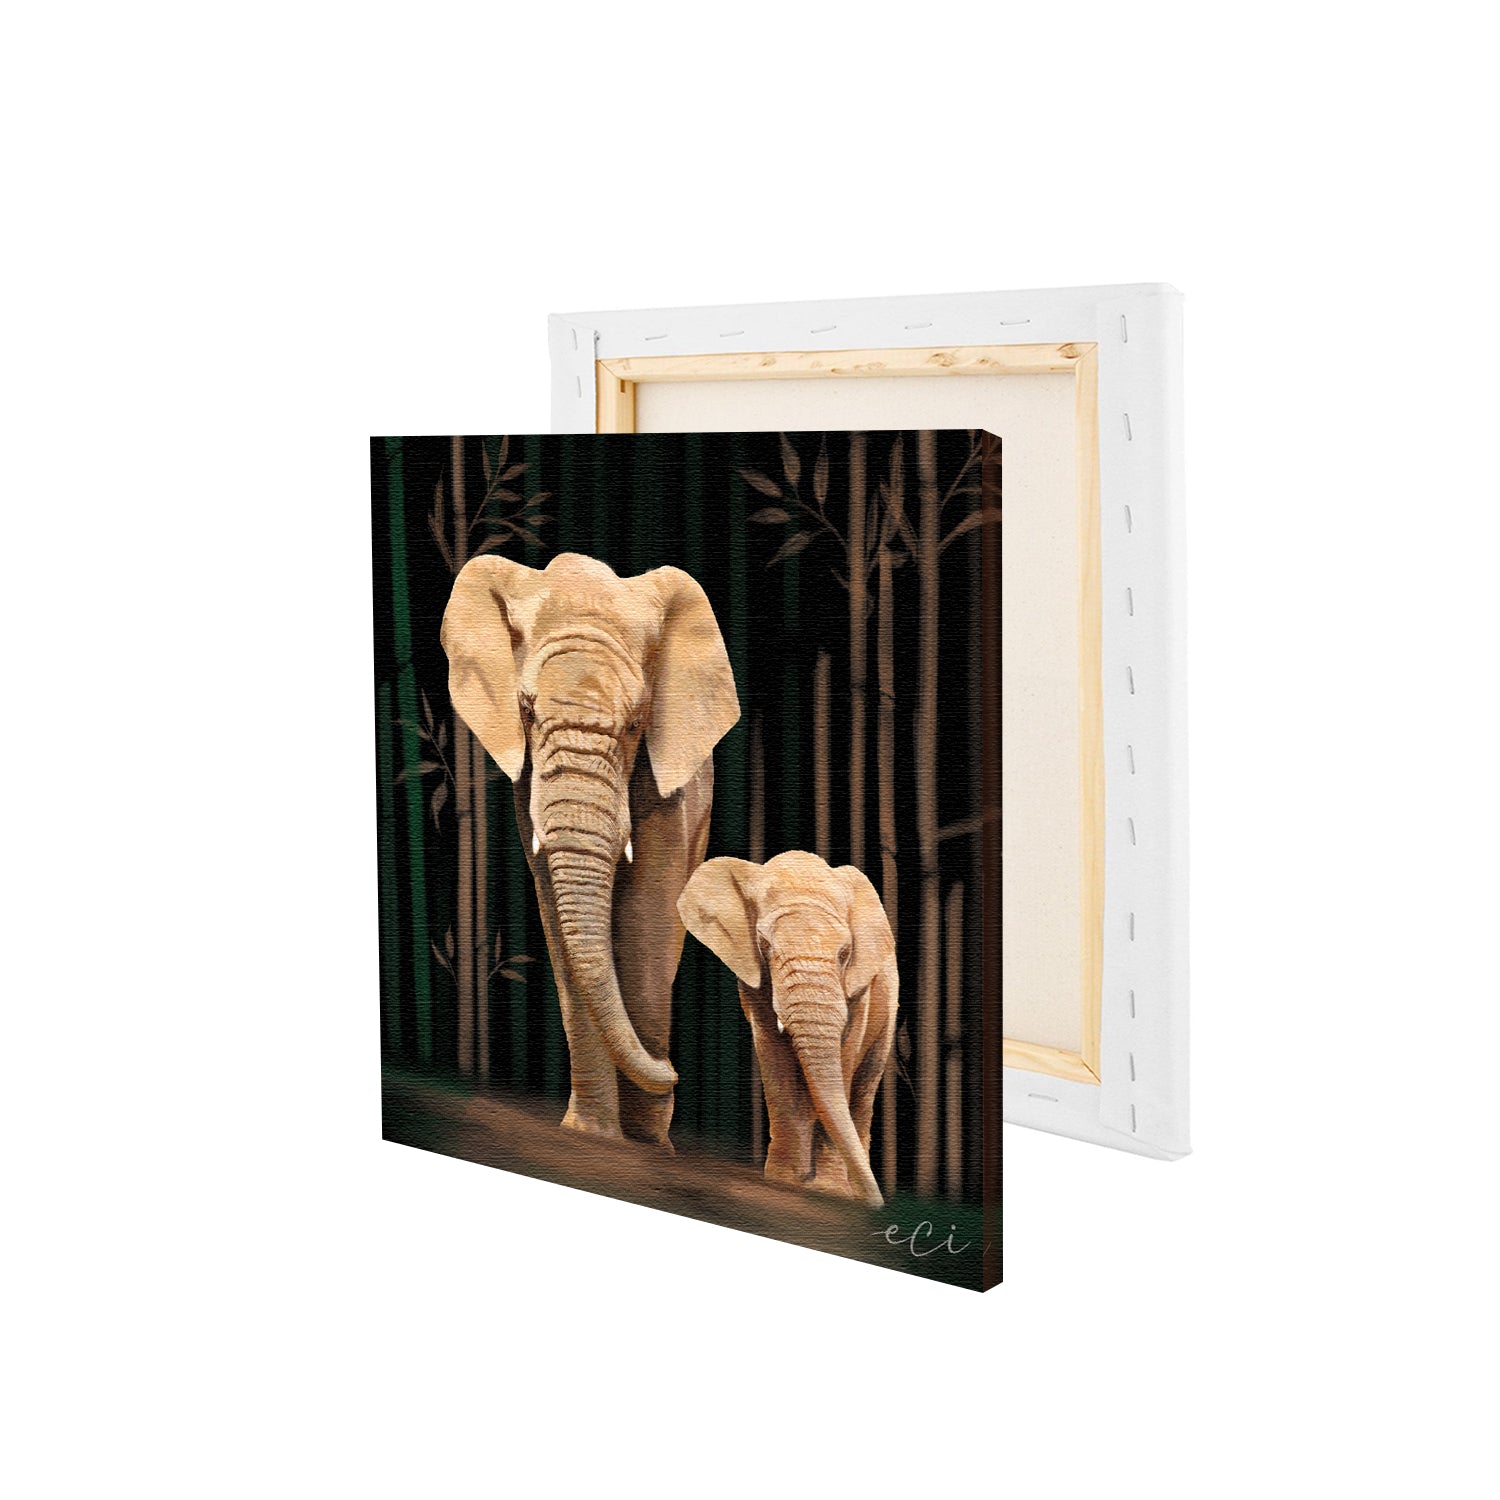 Elephant With Baby Elephant Canvas Painting Digital Printed Animal Wall Art 4